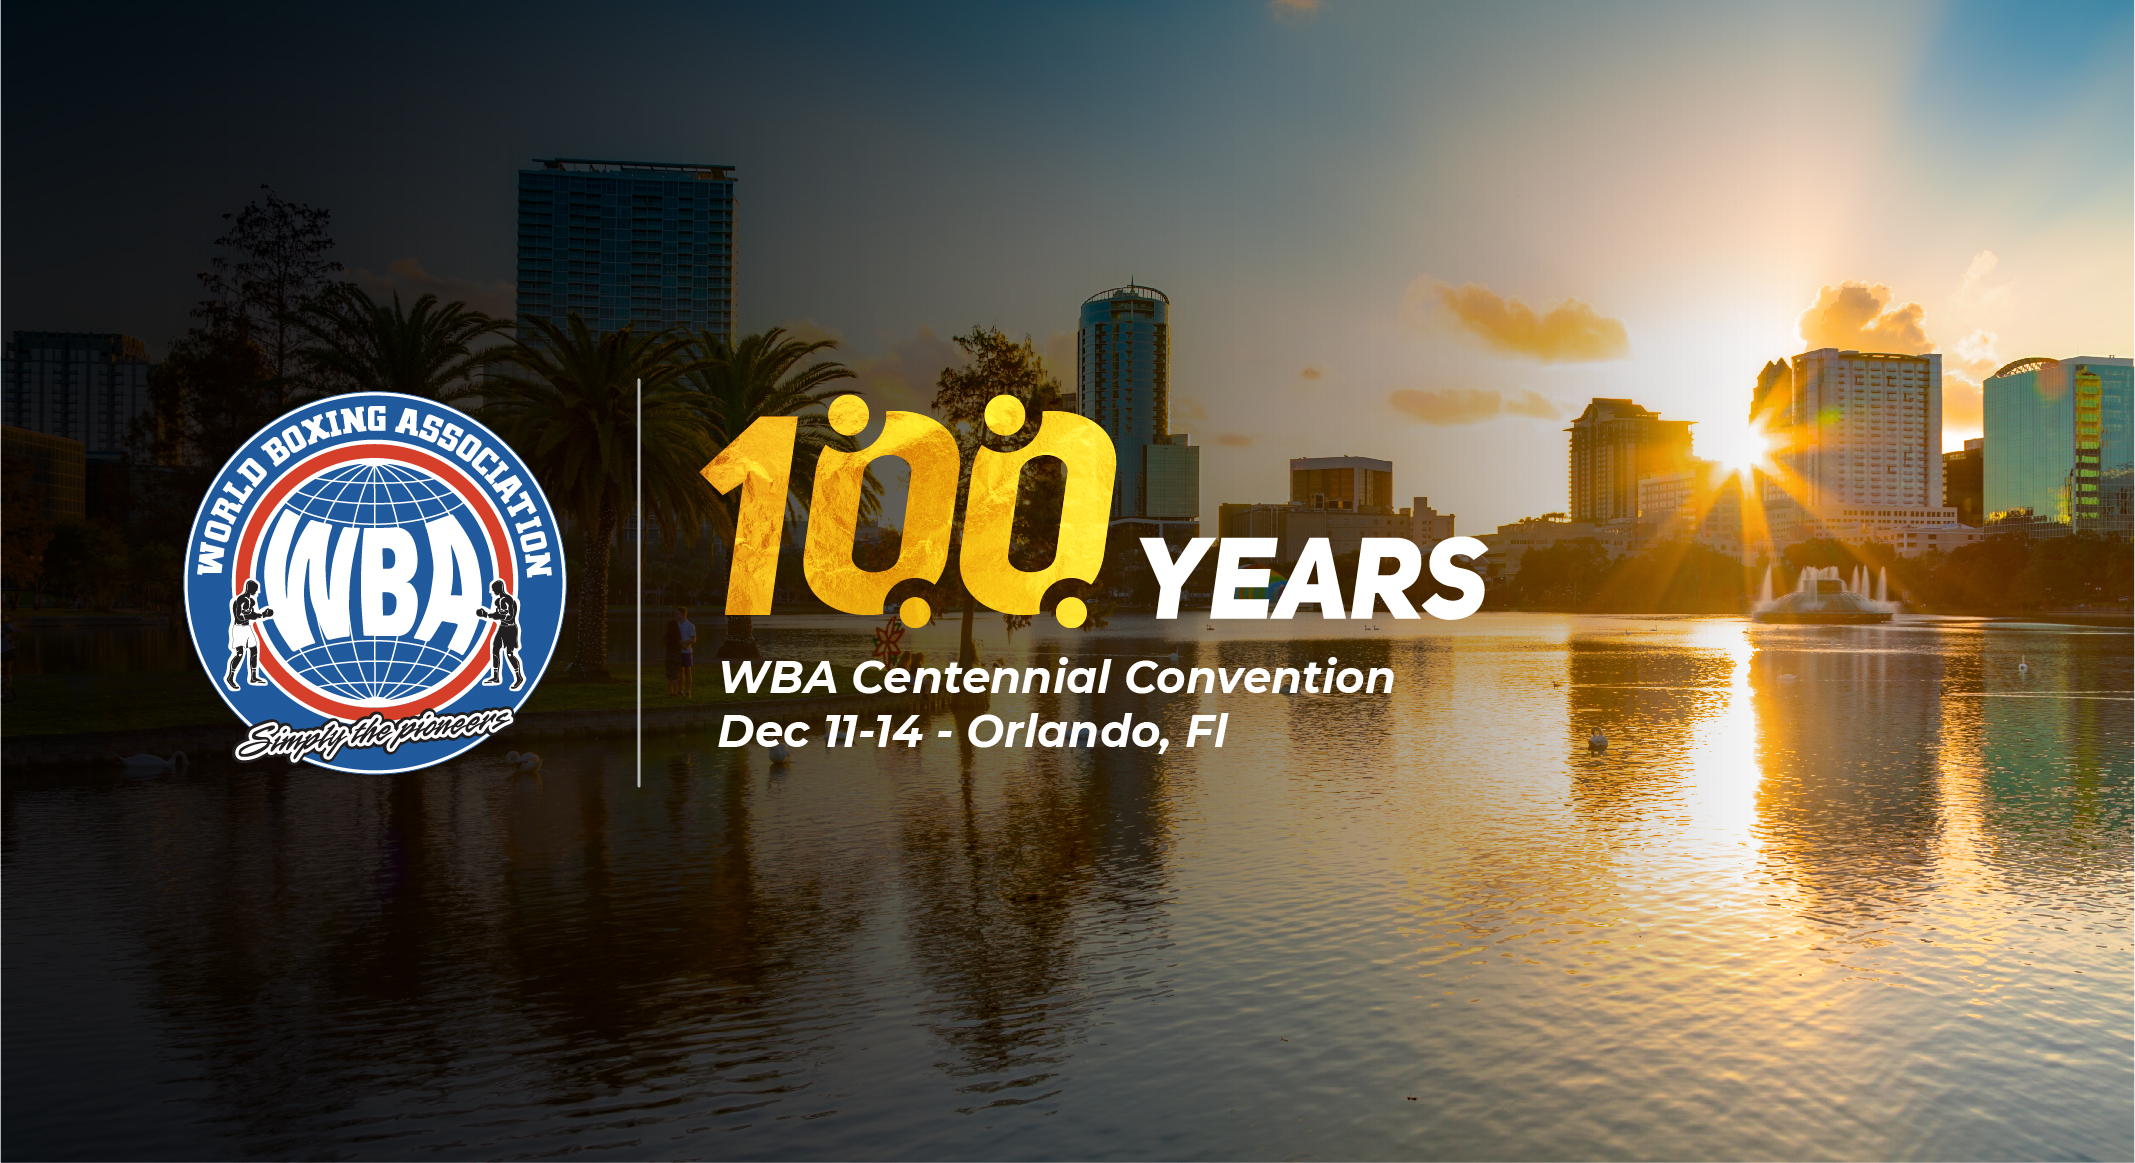 WBA Centennial Convention in Orlando sparks great expectations 